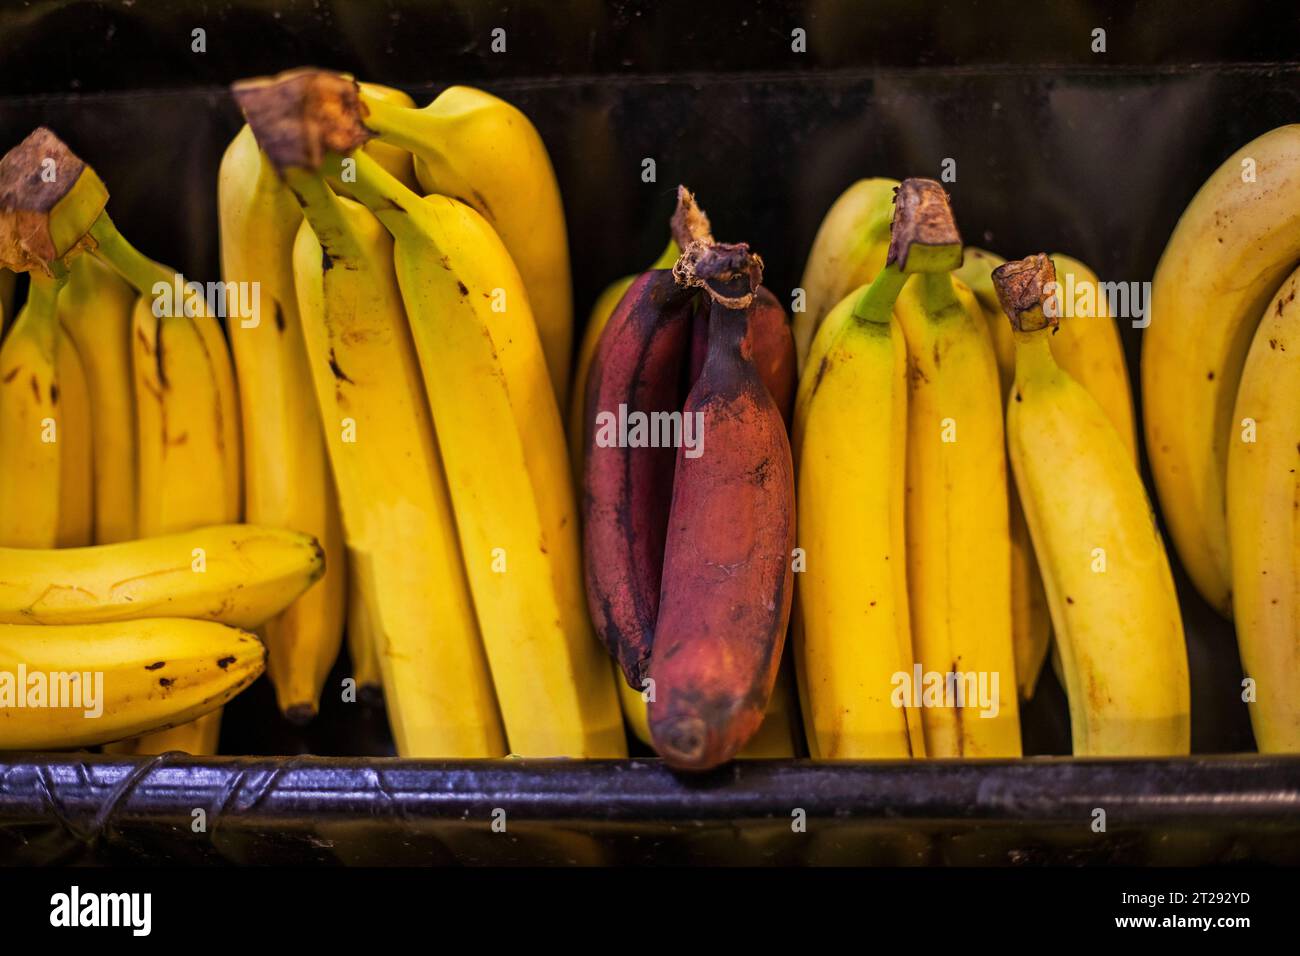 three different types of bananas on the counter in a supermarket Stock Photo